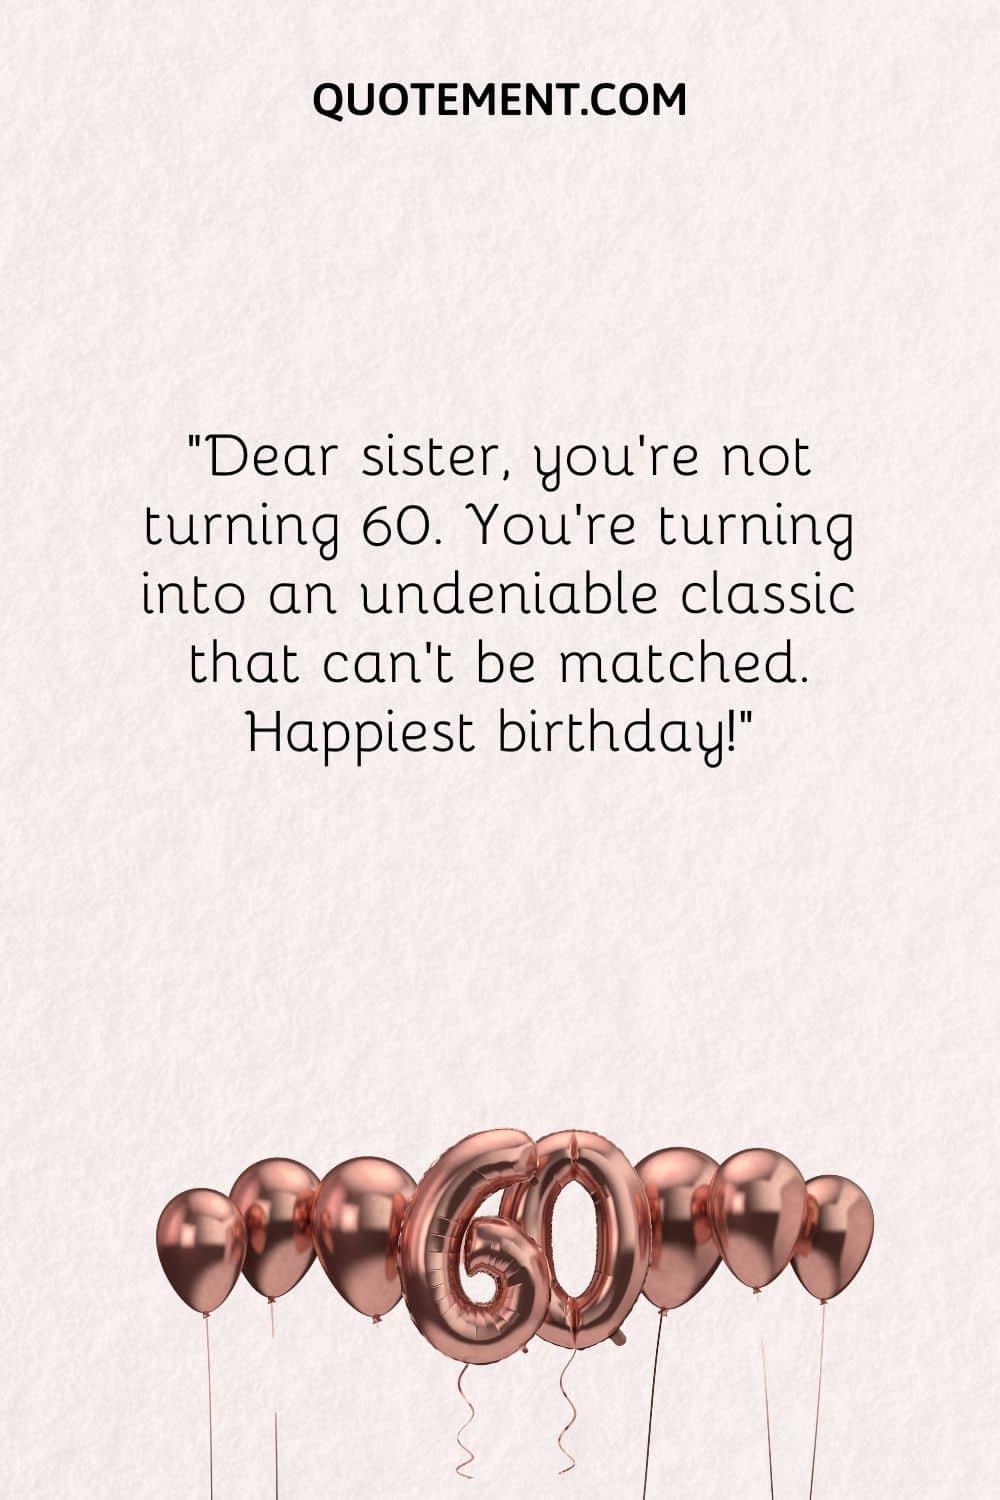 Dear sister, you're not turning 60. You're turning into an undeniable classic that can't be matched